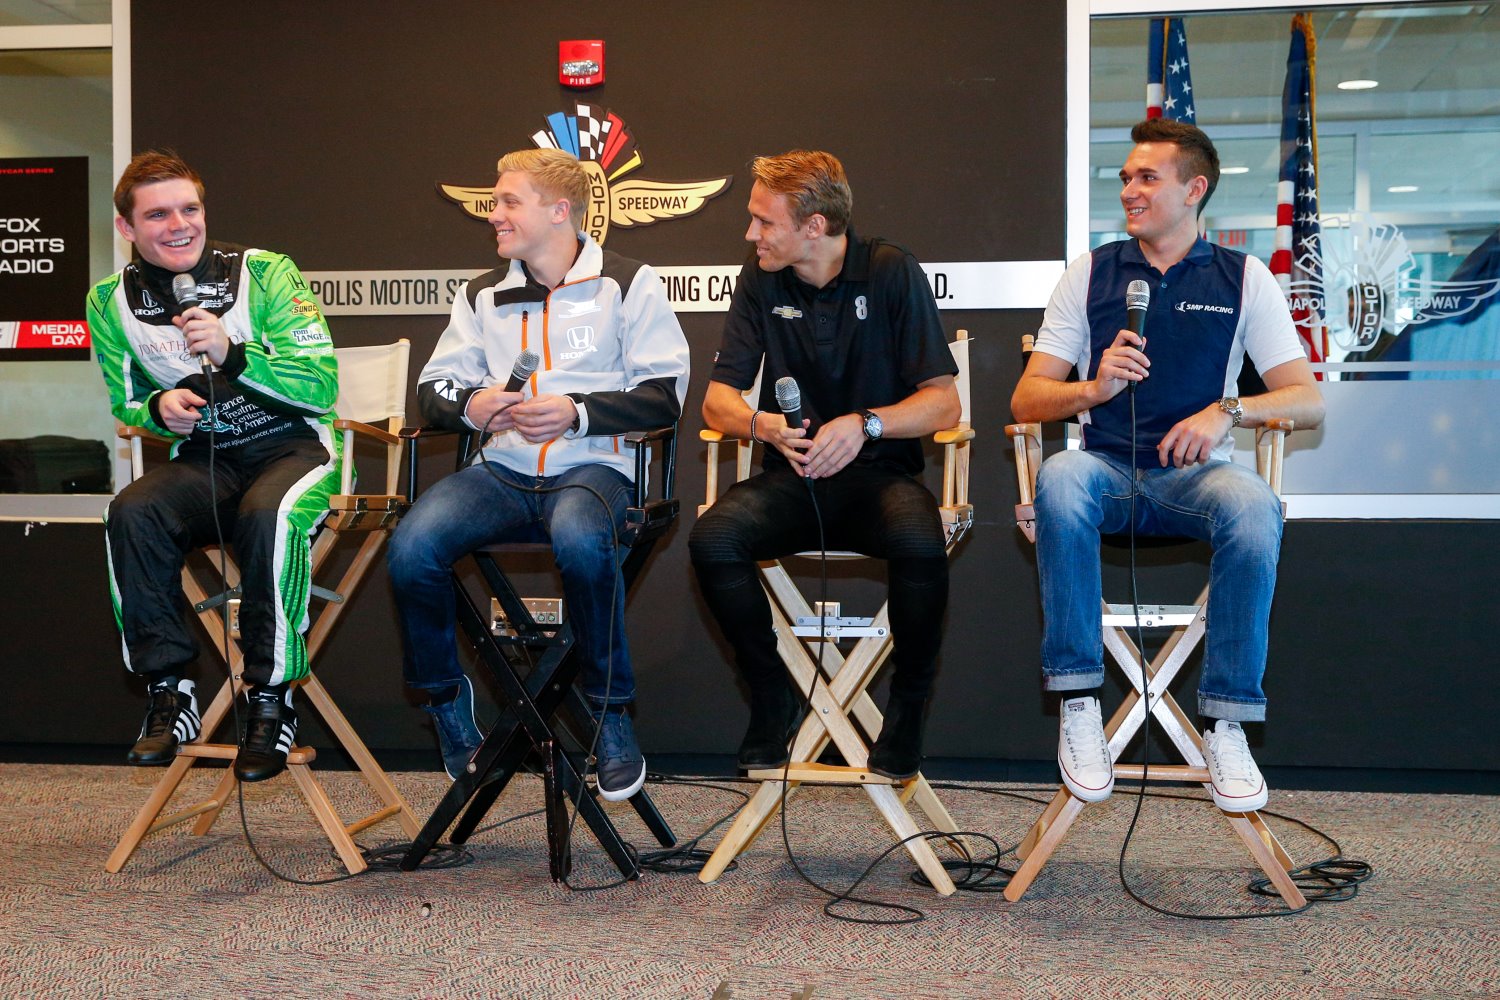 From left, Daly, Pigot, Chilton and Aleshin